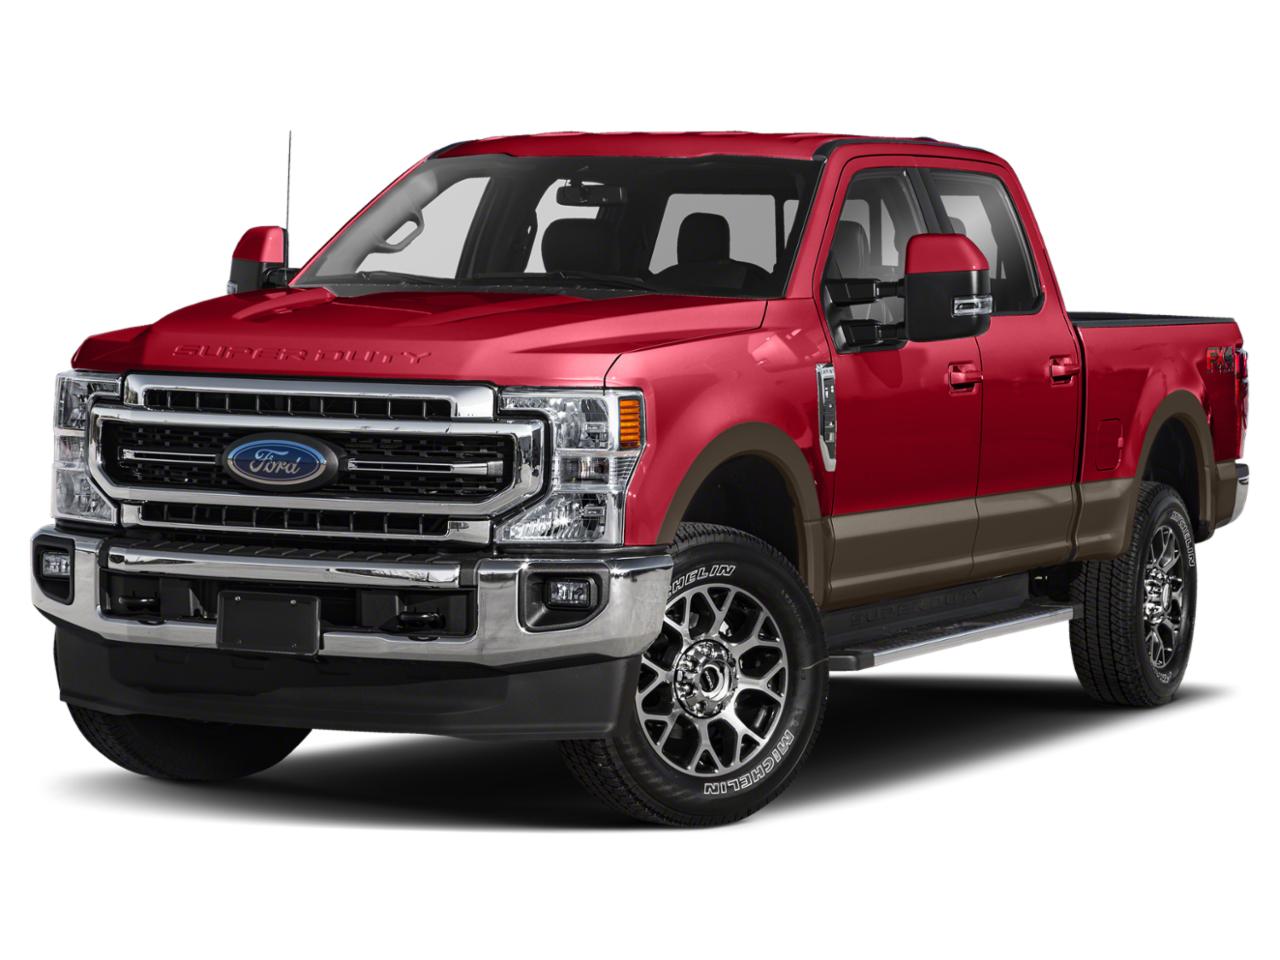 New Rapid Red Metallic Tinted Clearcoat 2021 Ford Super Duty F 250 Srw Lariat 4wd Crew Cab 6 75